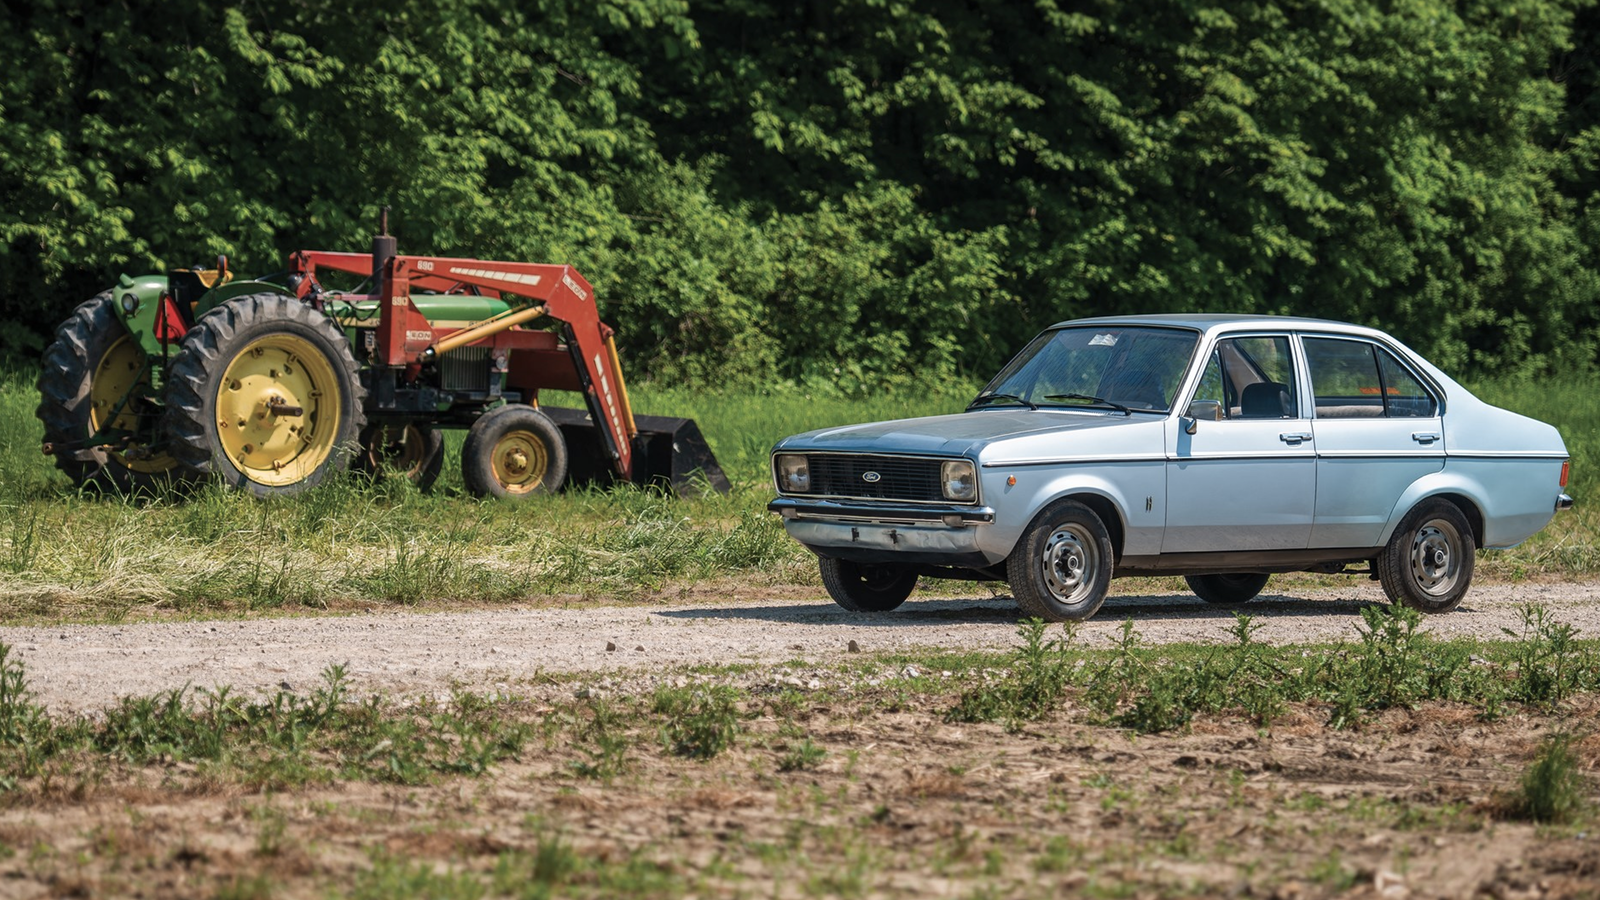 Pope John Paul II's Ford Escort is up for auction